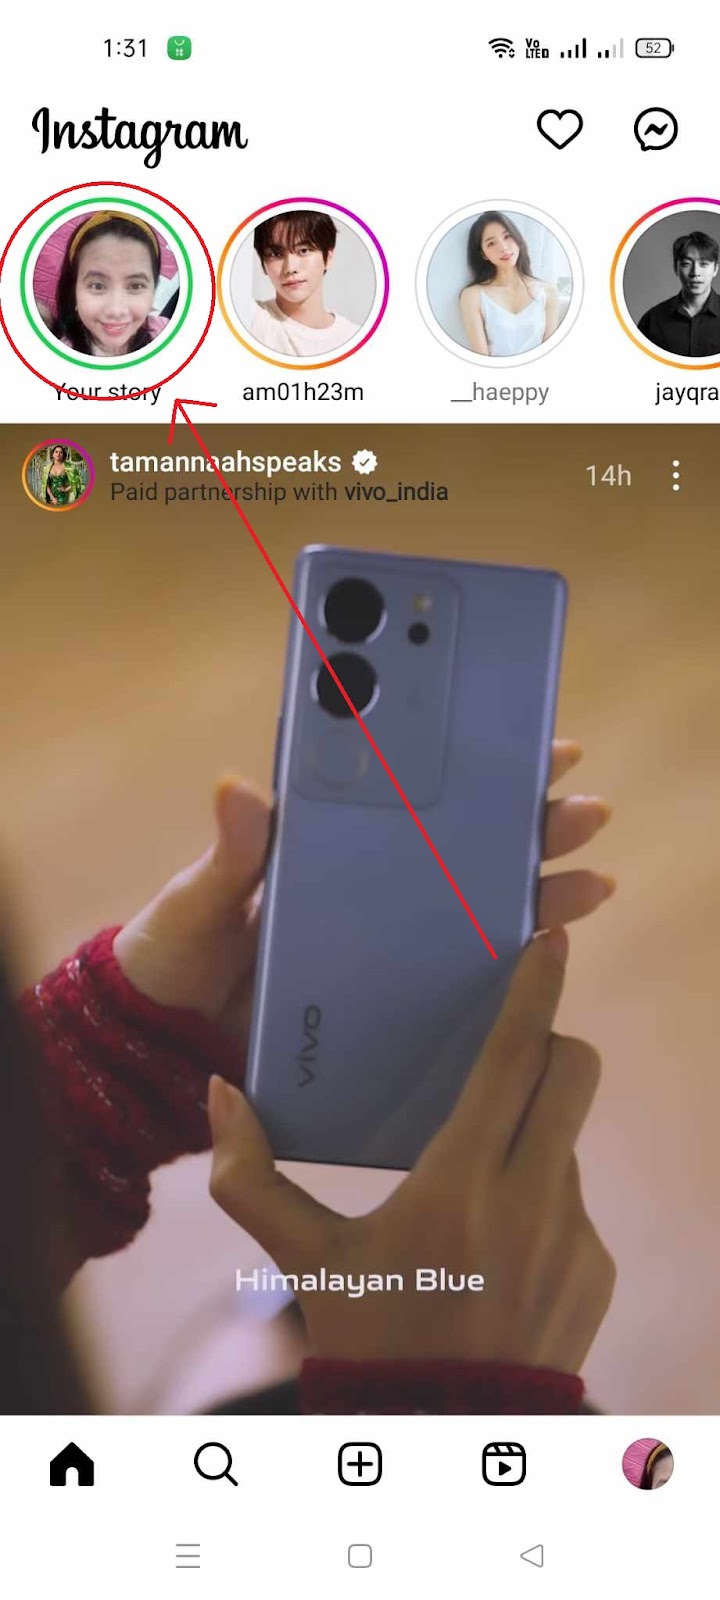 What does Green Circle in Instagram Story Mean - Green Circle